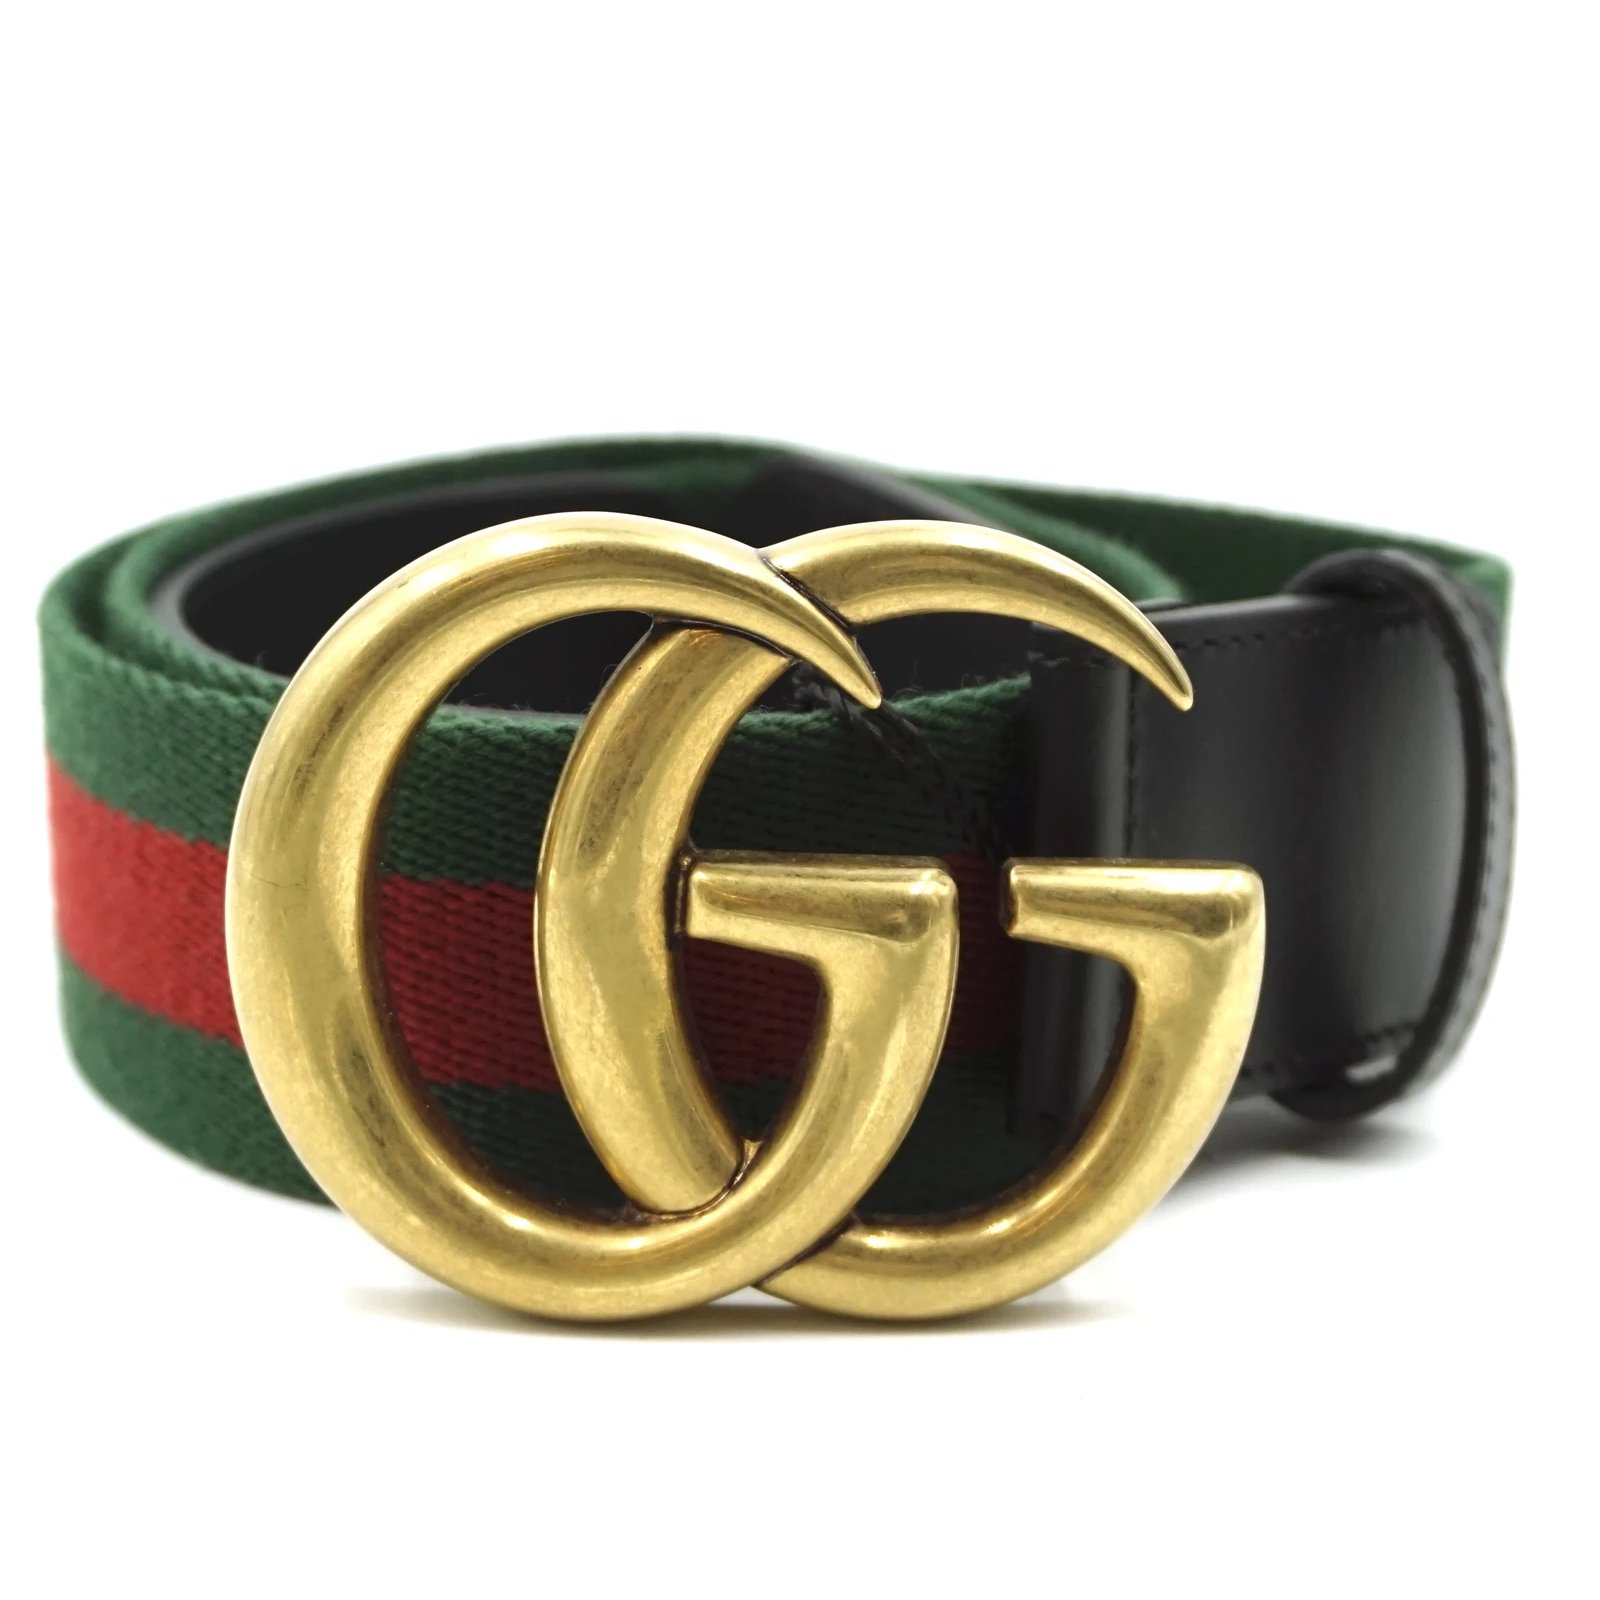 gucci belts red and green